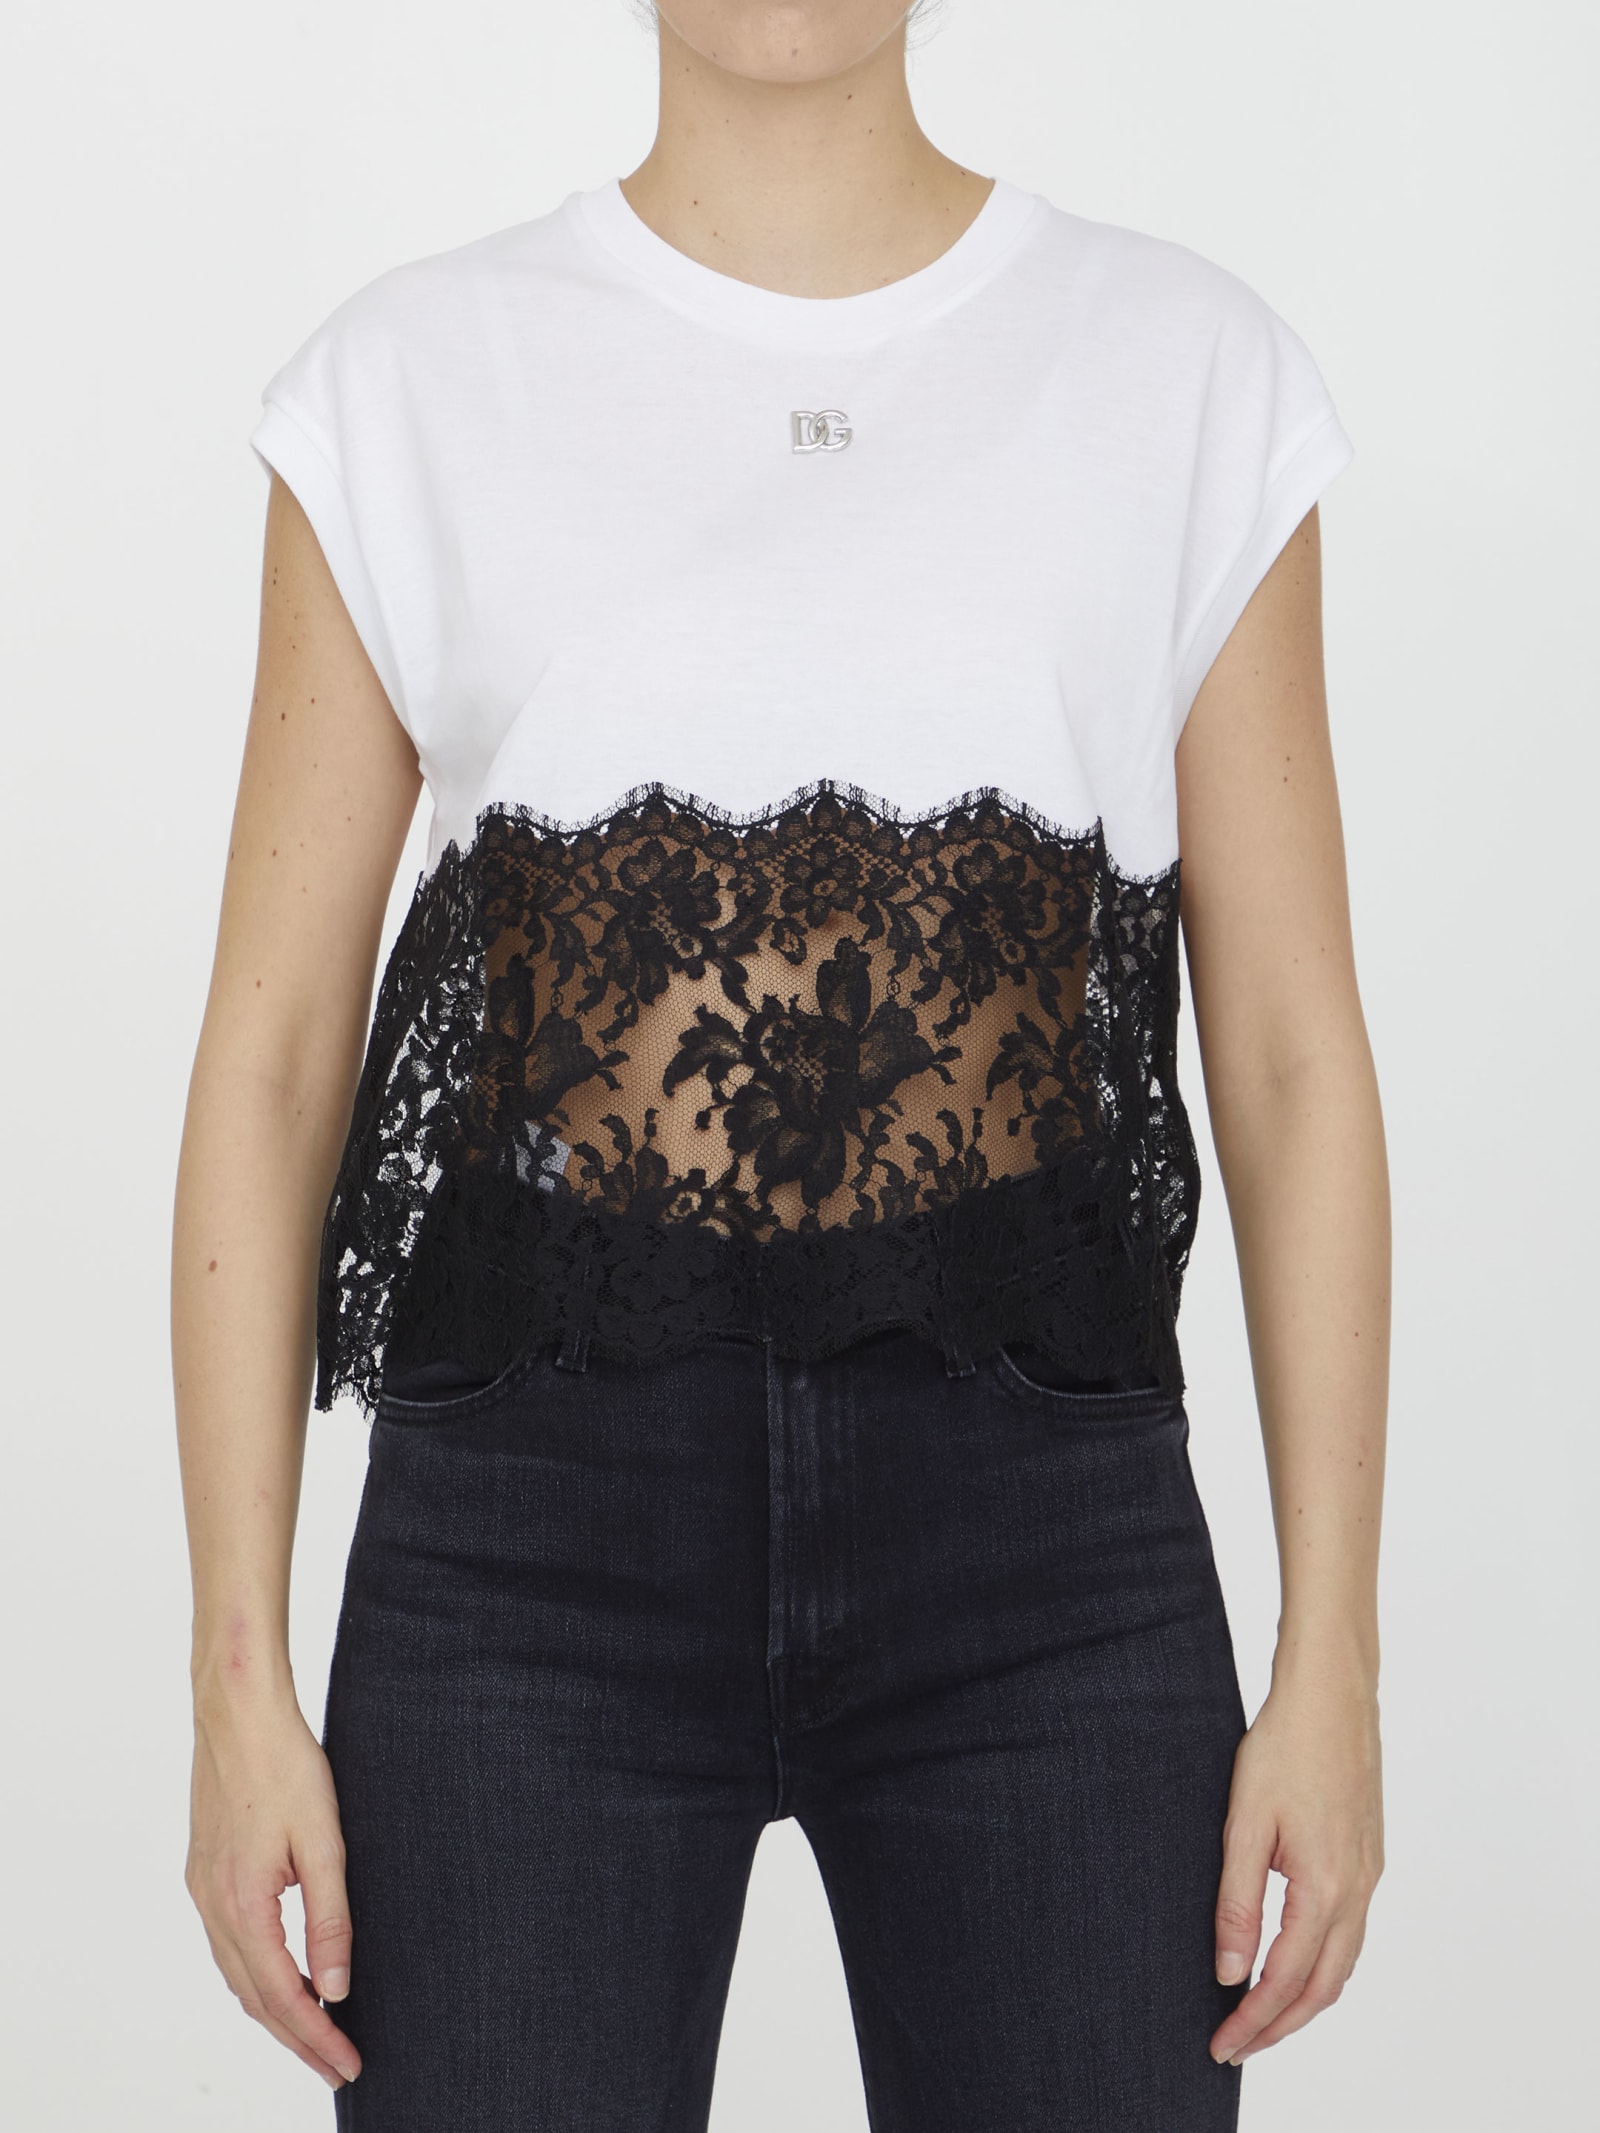 DOLCE & GABBANA T-SHIRT WITH LACE DETAILS